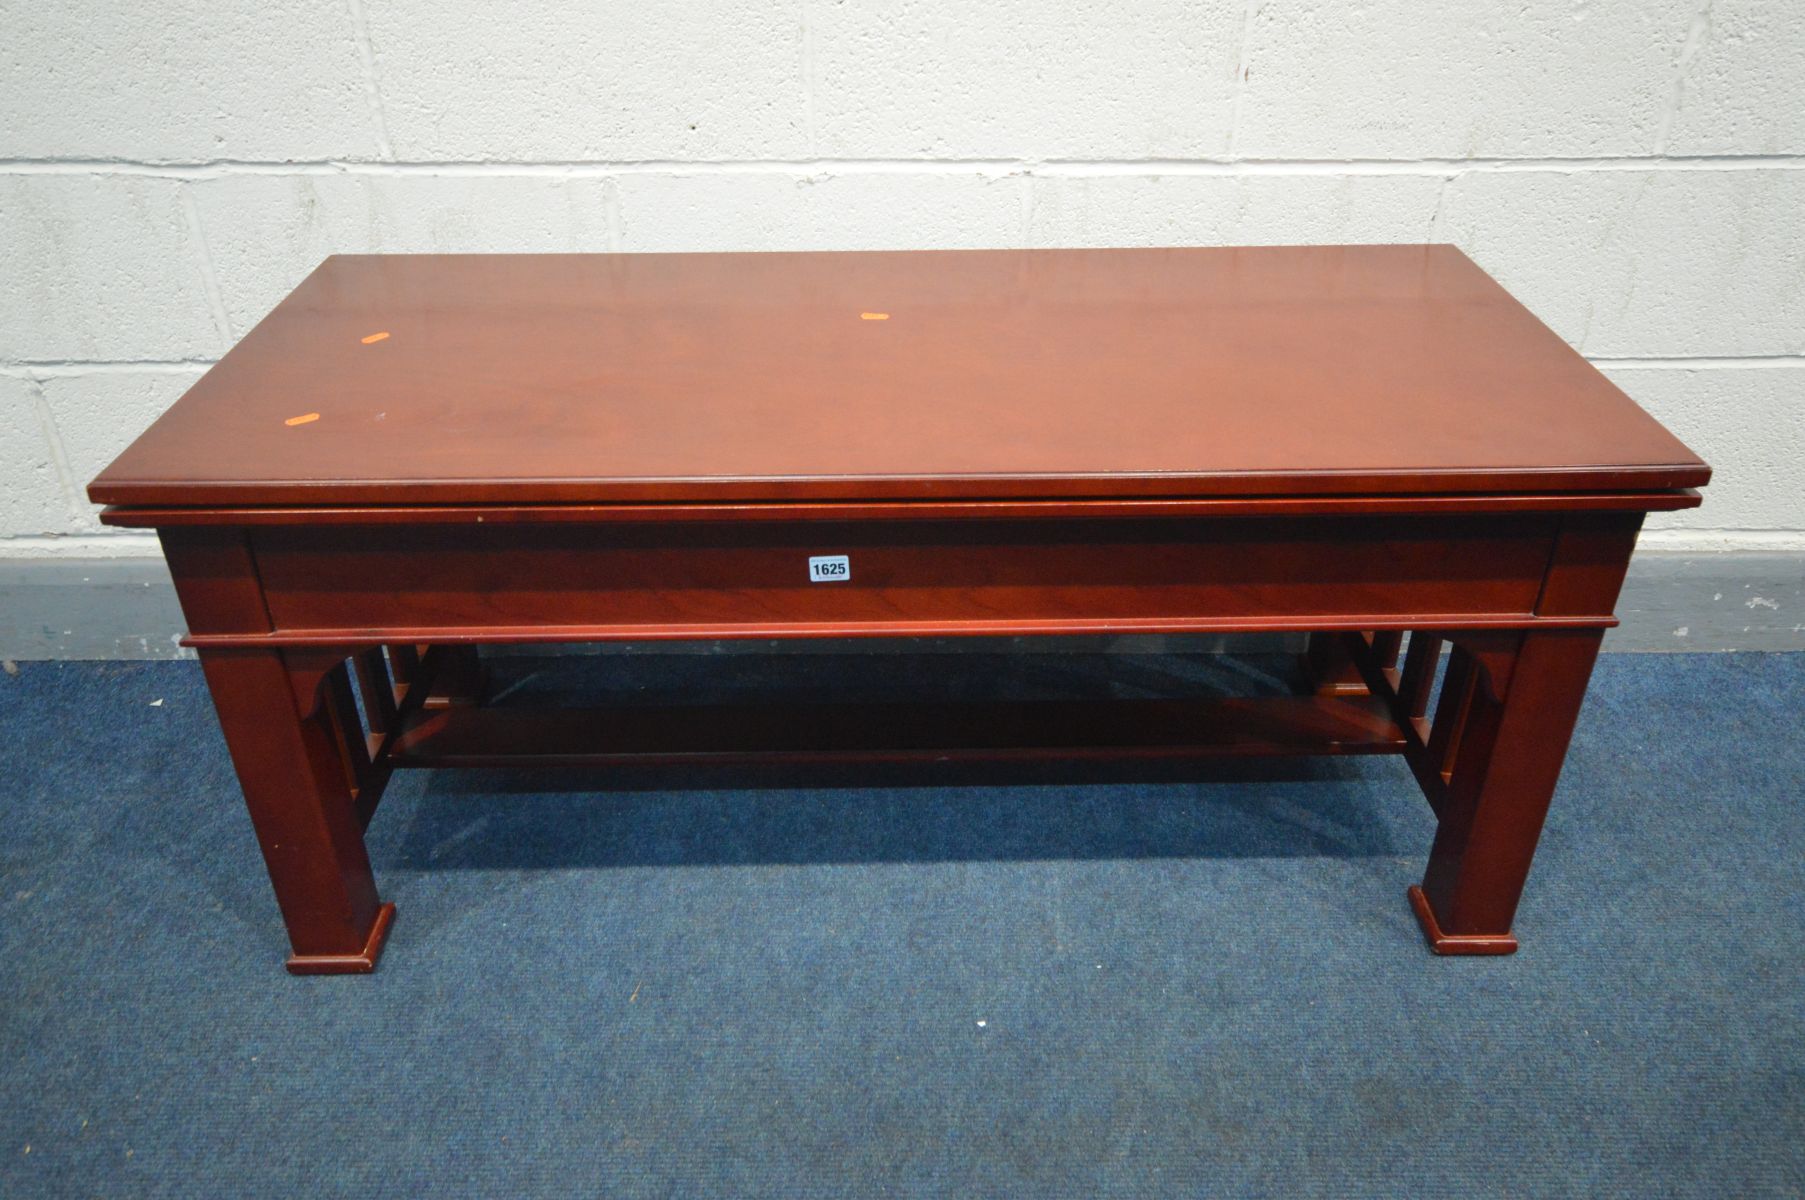 A JONNY TEXAS MAHOGANY FIVE IN ONE CASINO TABLE, with a coffee table top, roulette wheel, blackjack,